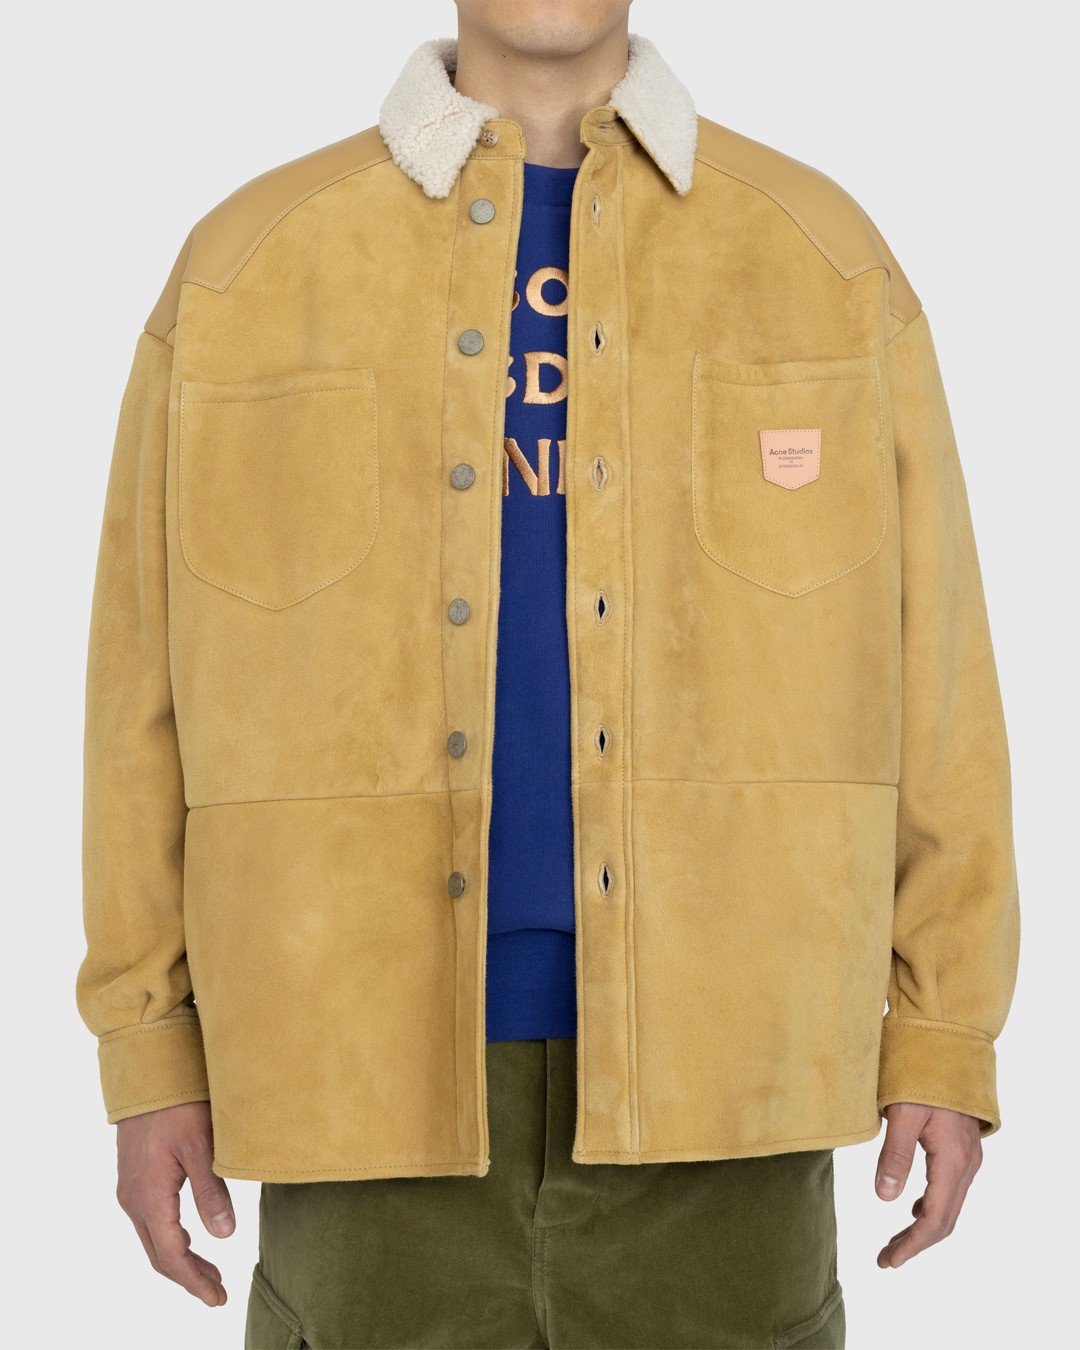 Acne Studios – Suede Leather Shearling Overshirt Straw Yellow - Fur & Shearling - Yellow - Image 2